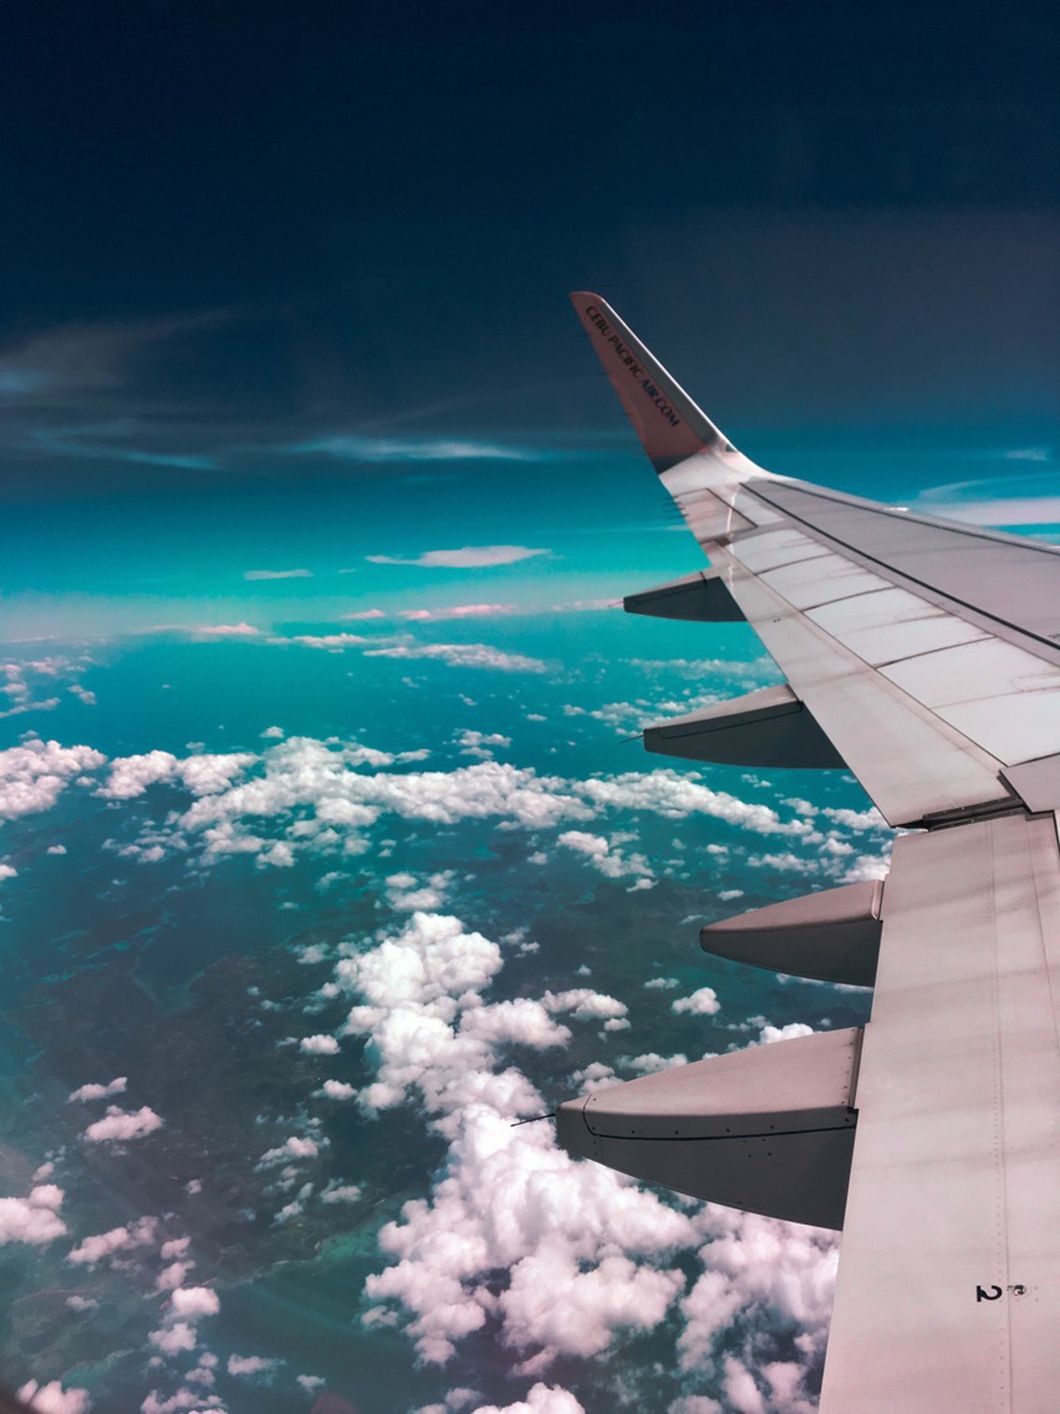 21 Productive Things To Do On A Plane Other Than Snooze